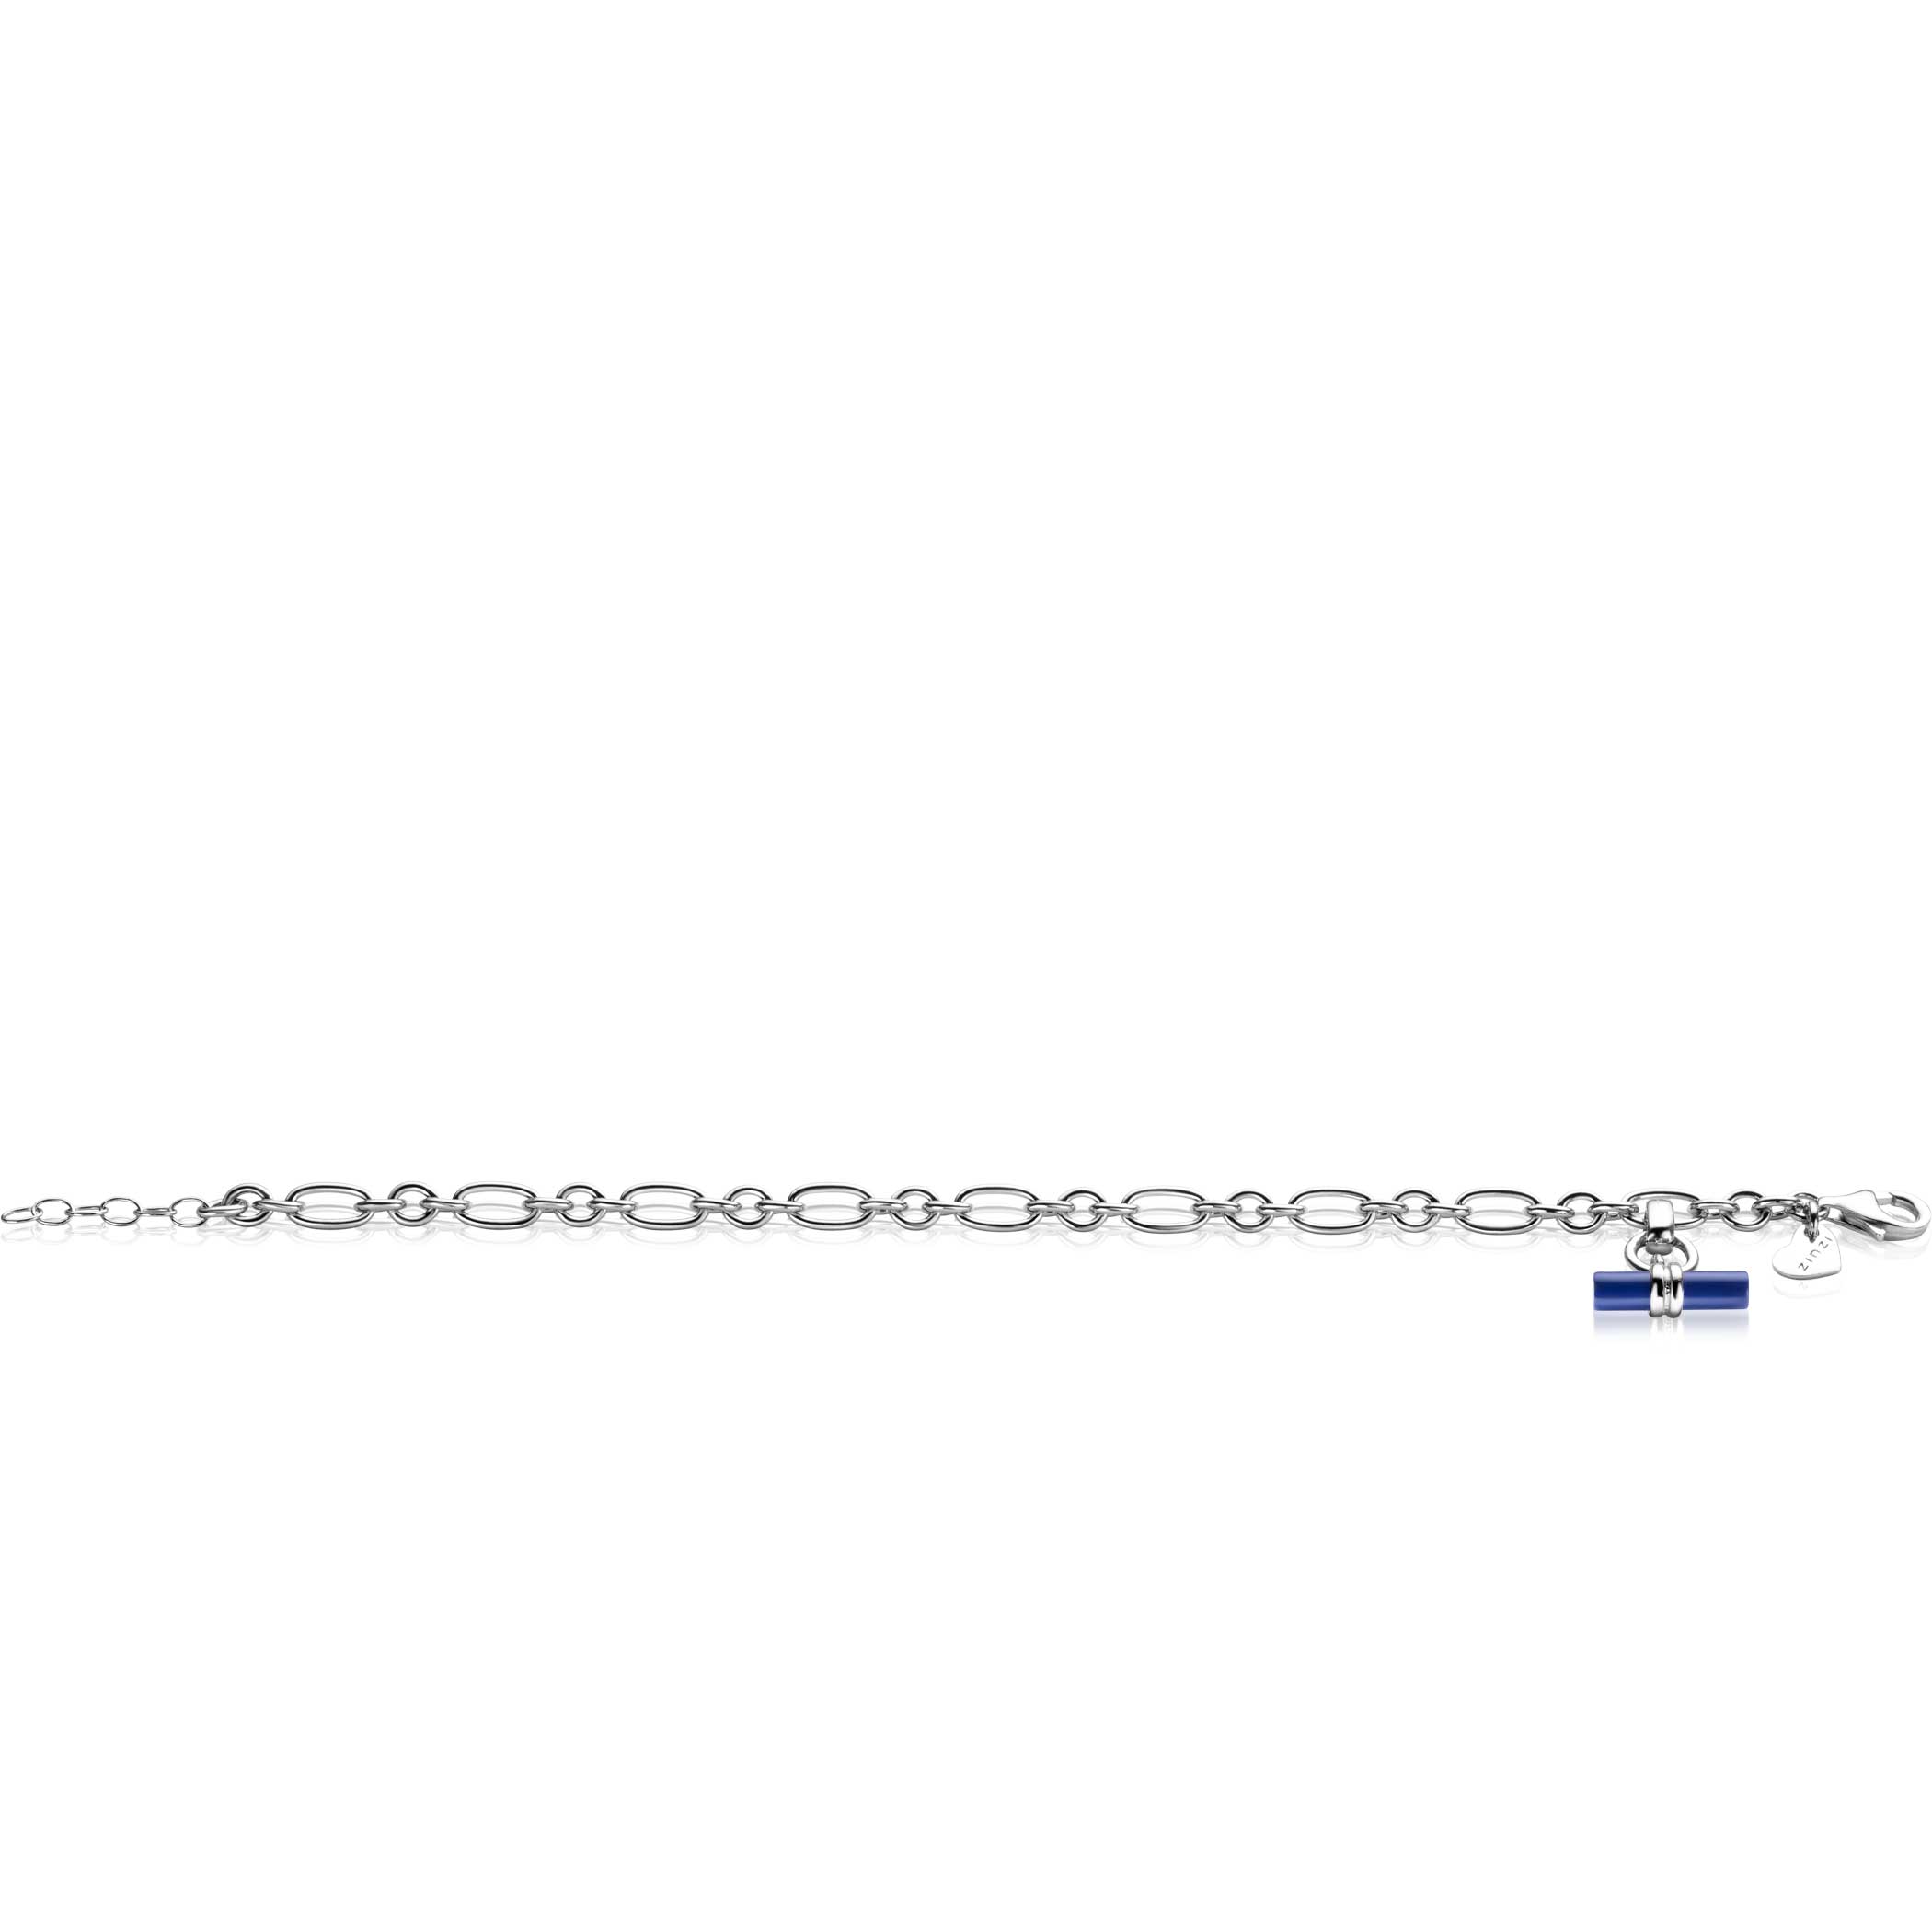 ZINZI Sterling Silver Chain Bracelet with Trendy Toggle Clasp Charm in Lapis Lazuli width 4mm 18-20cm ZIA2478